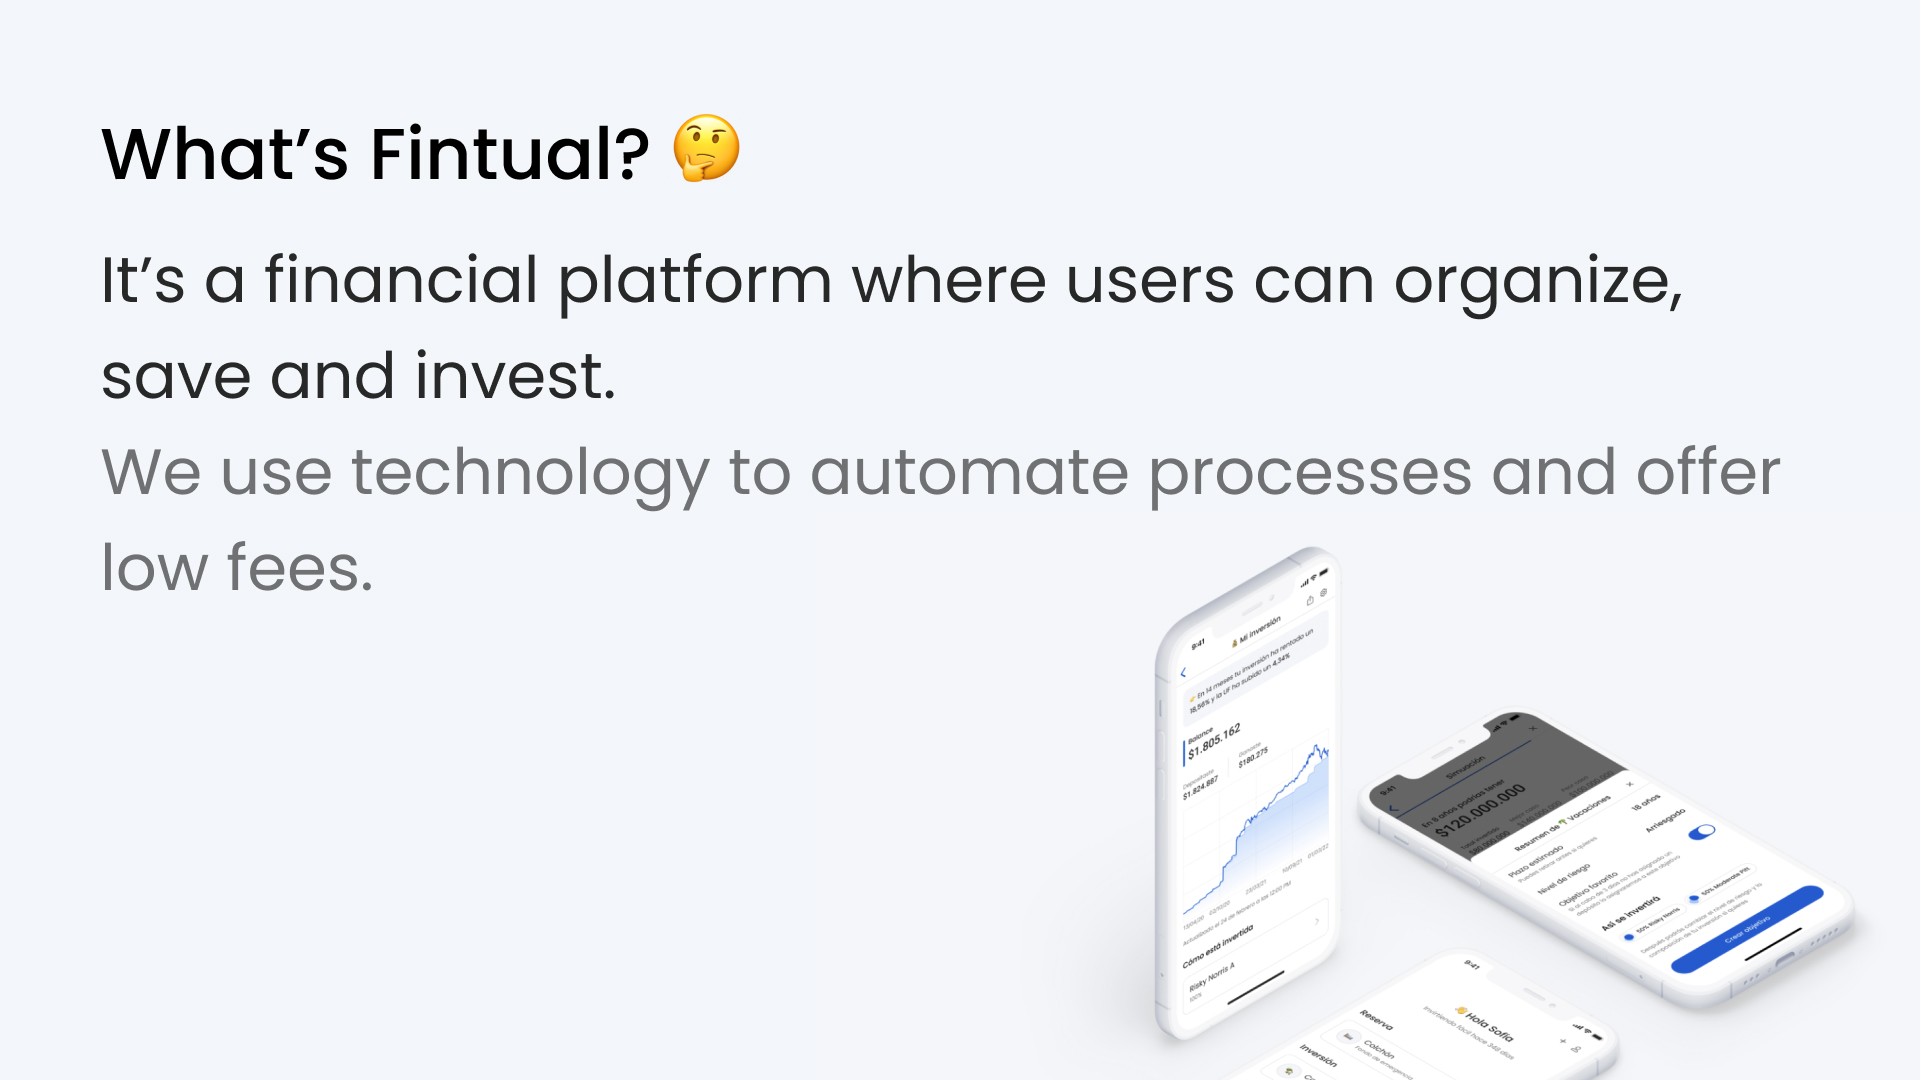 Presentation slide for Fintual, showing it as a financial tech app for investments.